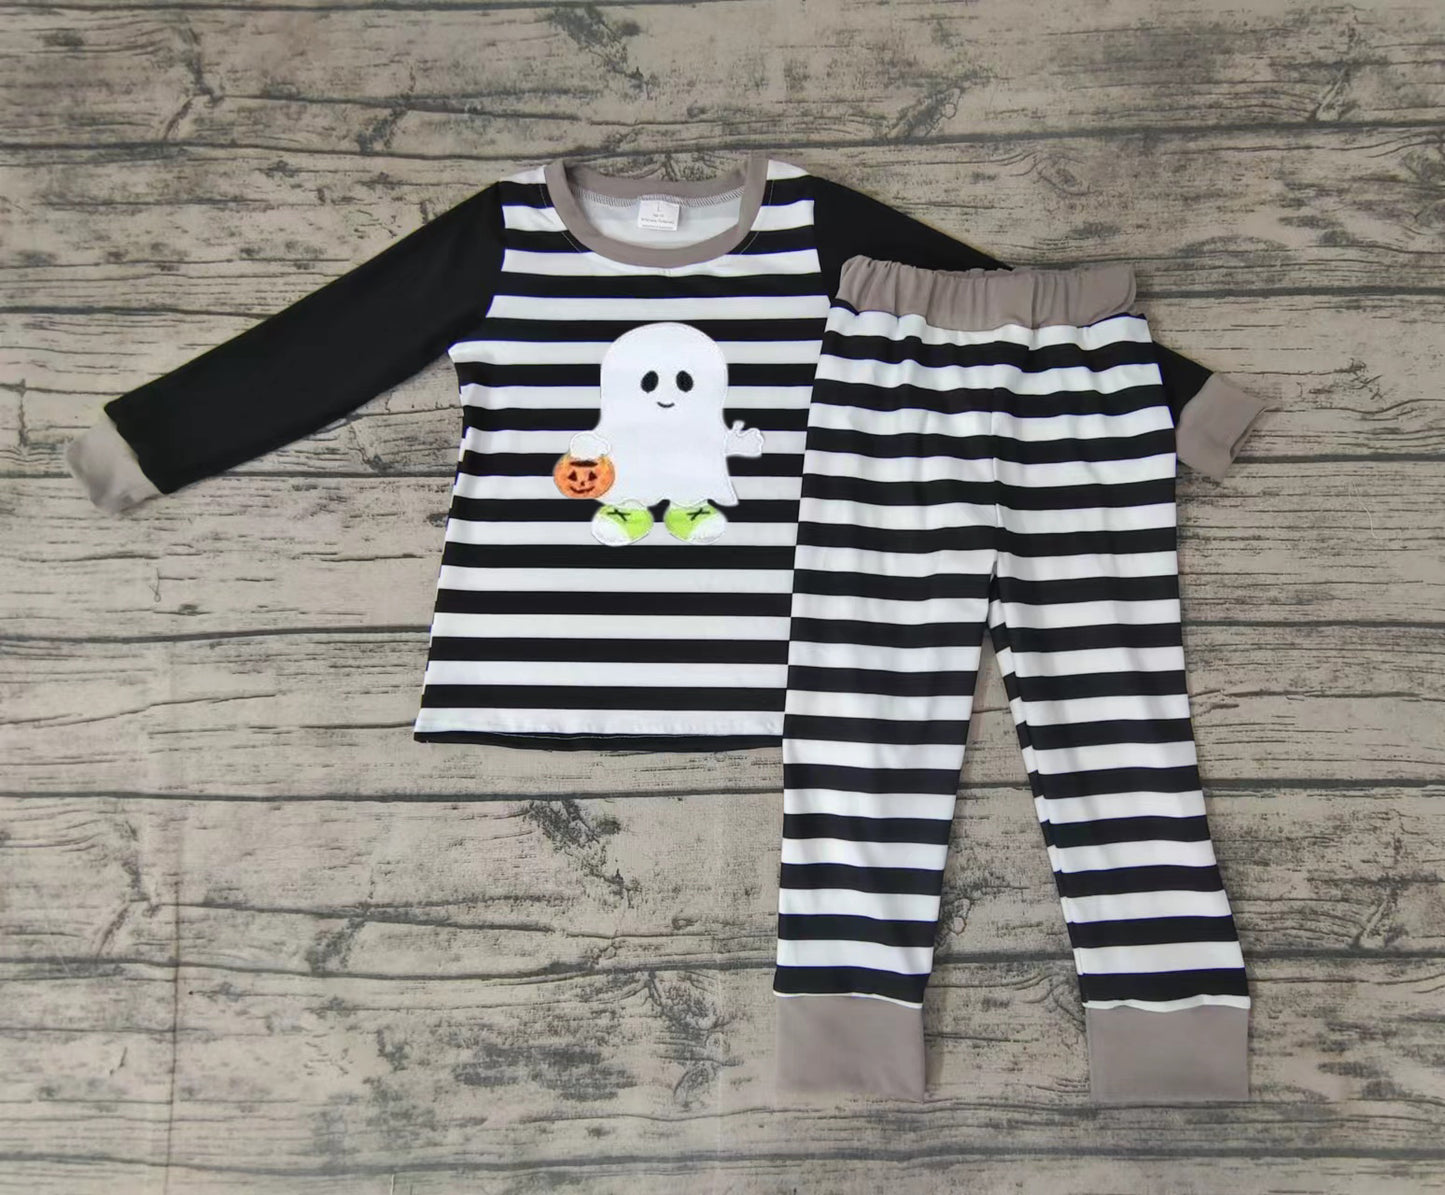 Baby boys ghost stripe pajamas pants clothes sets